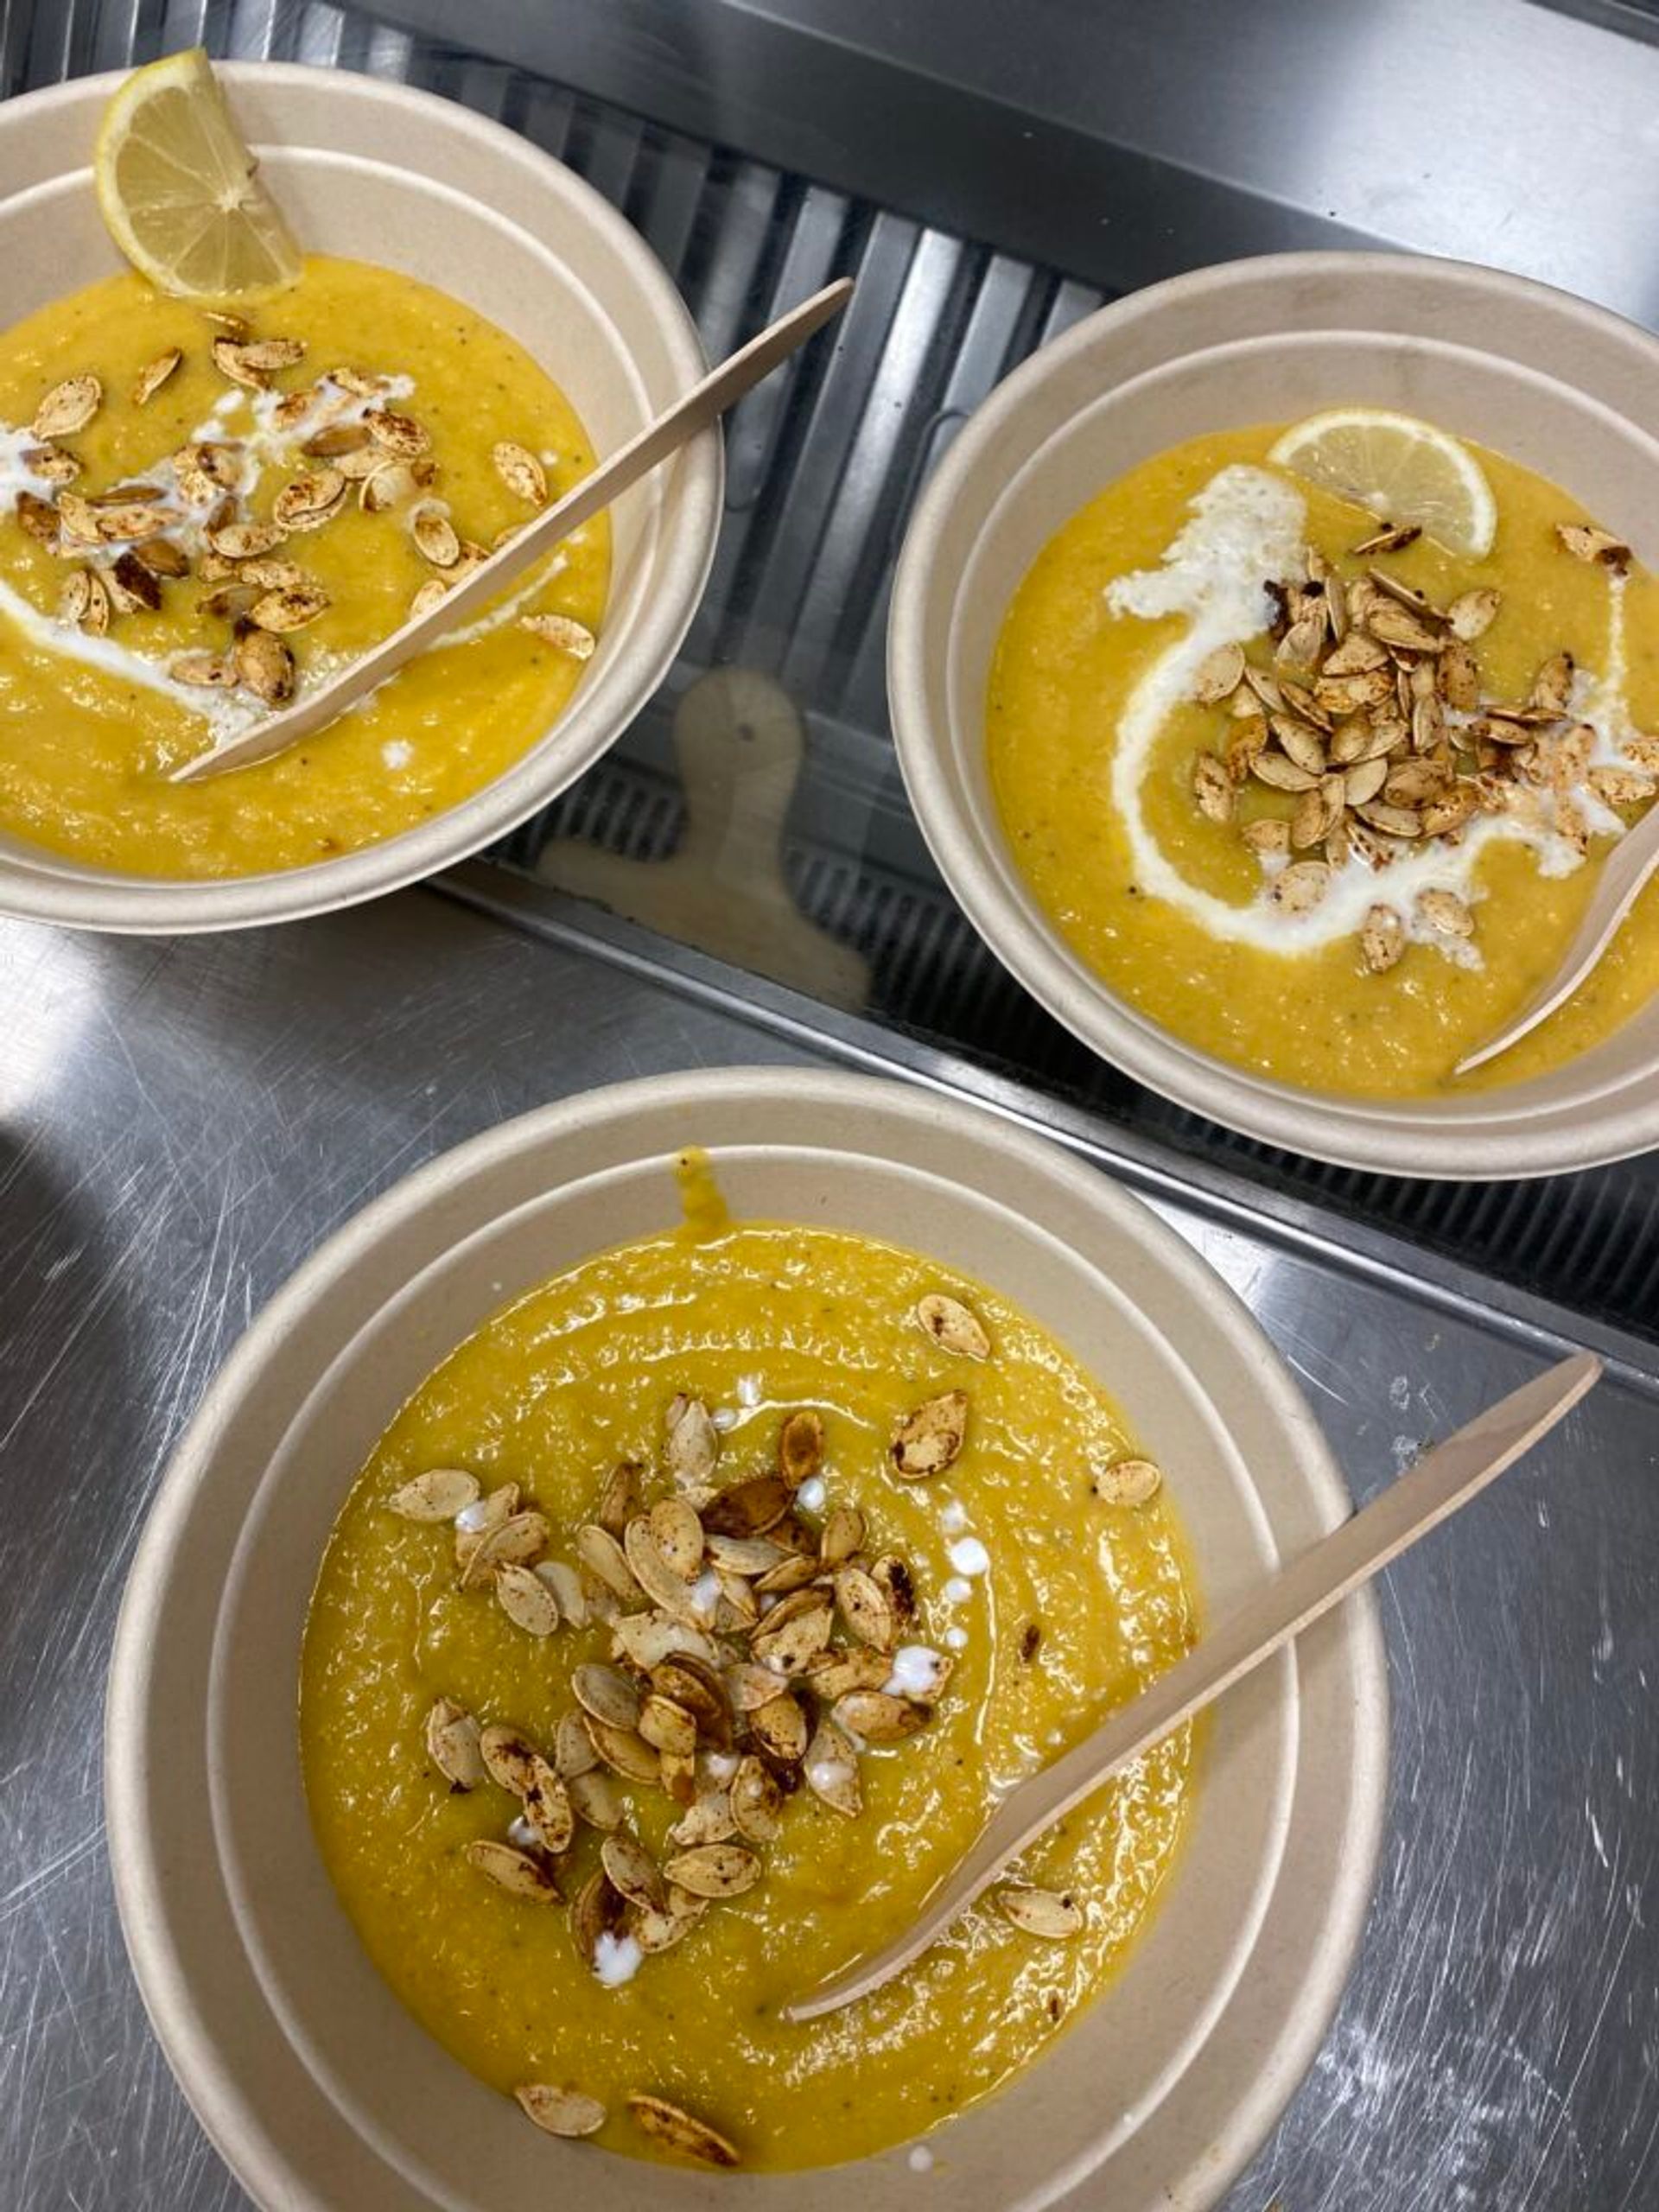 Freshly made pumpkin soup topped with pumpkin seeds.